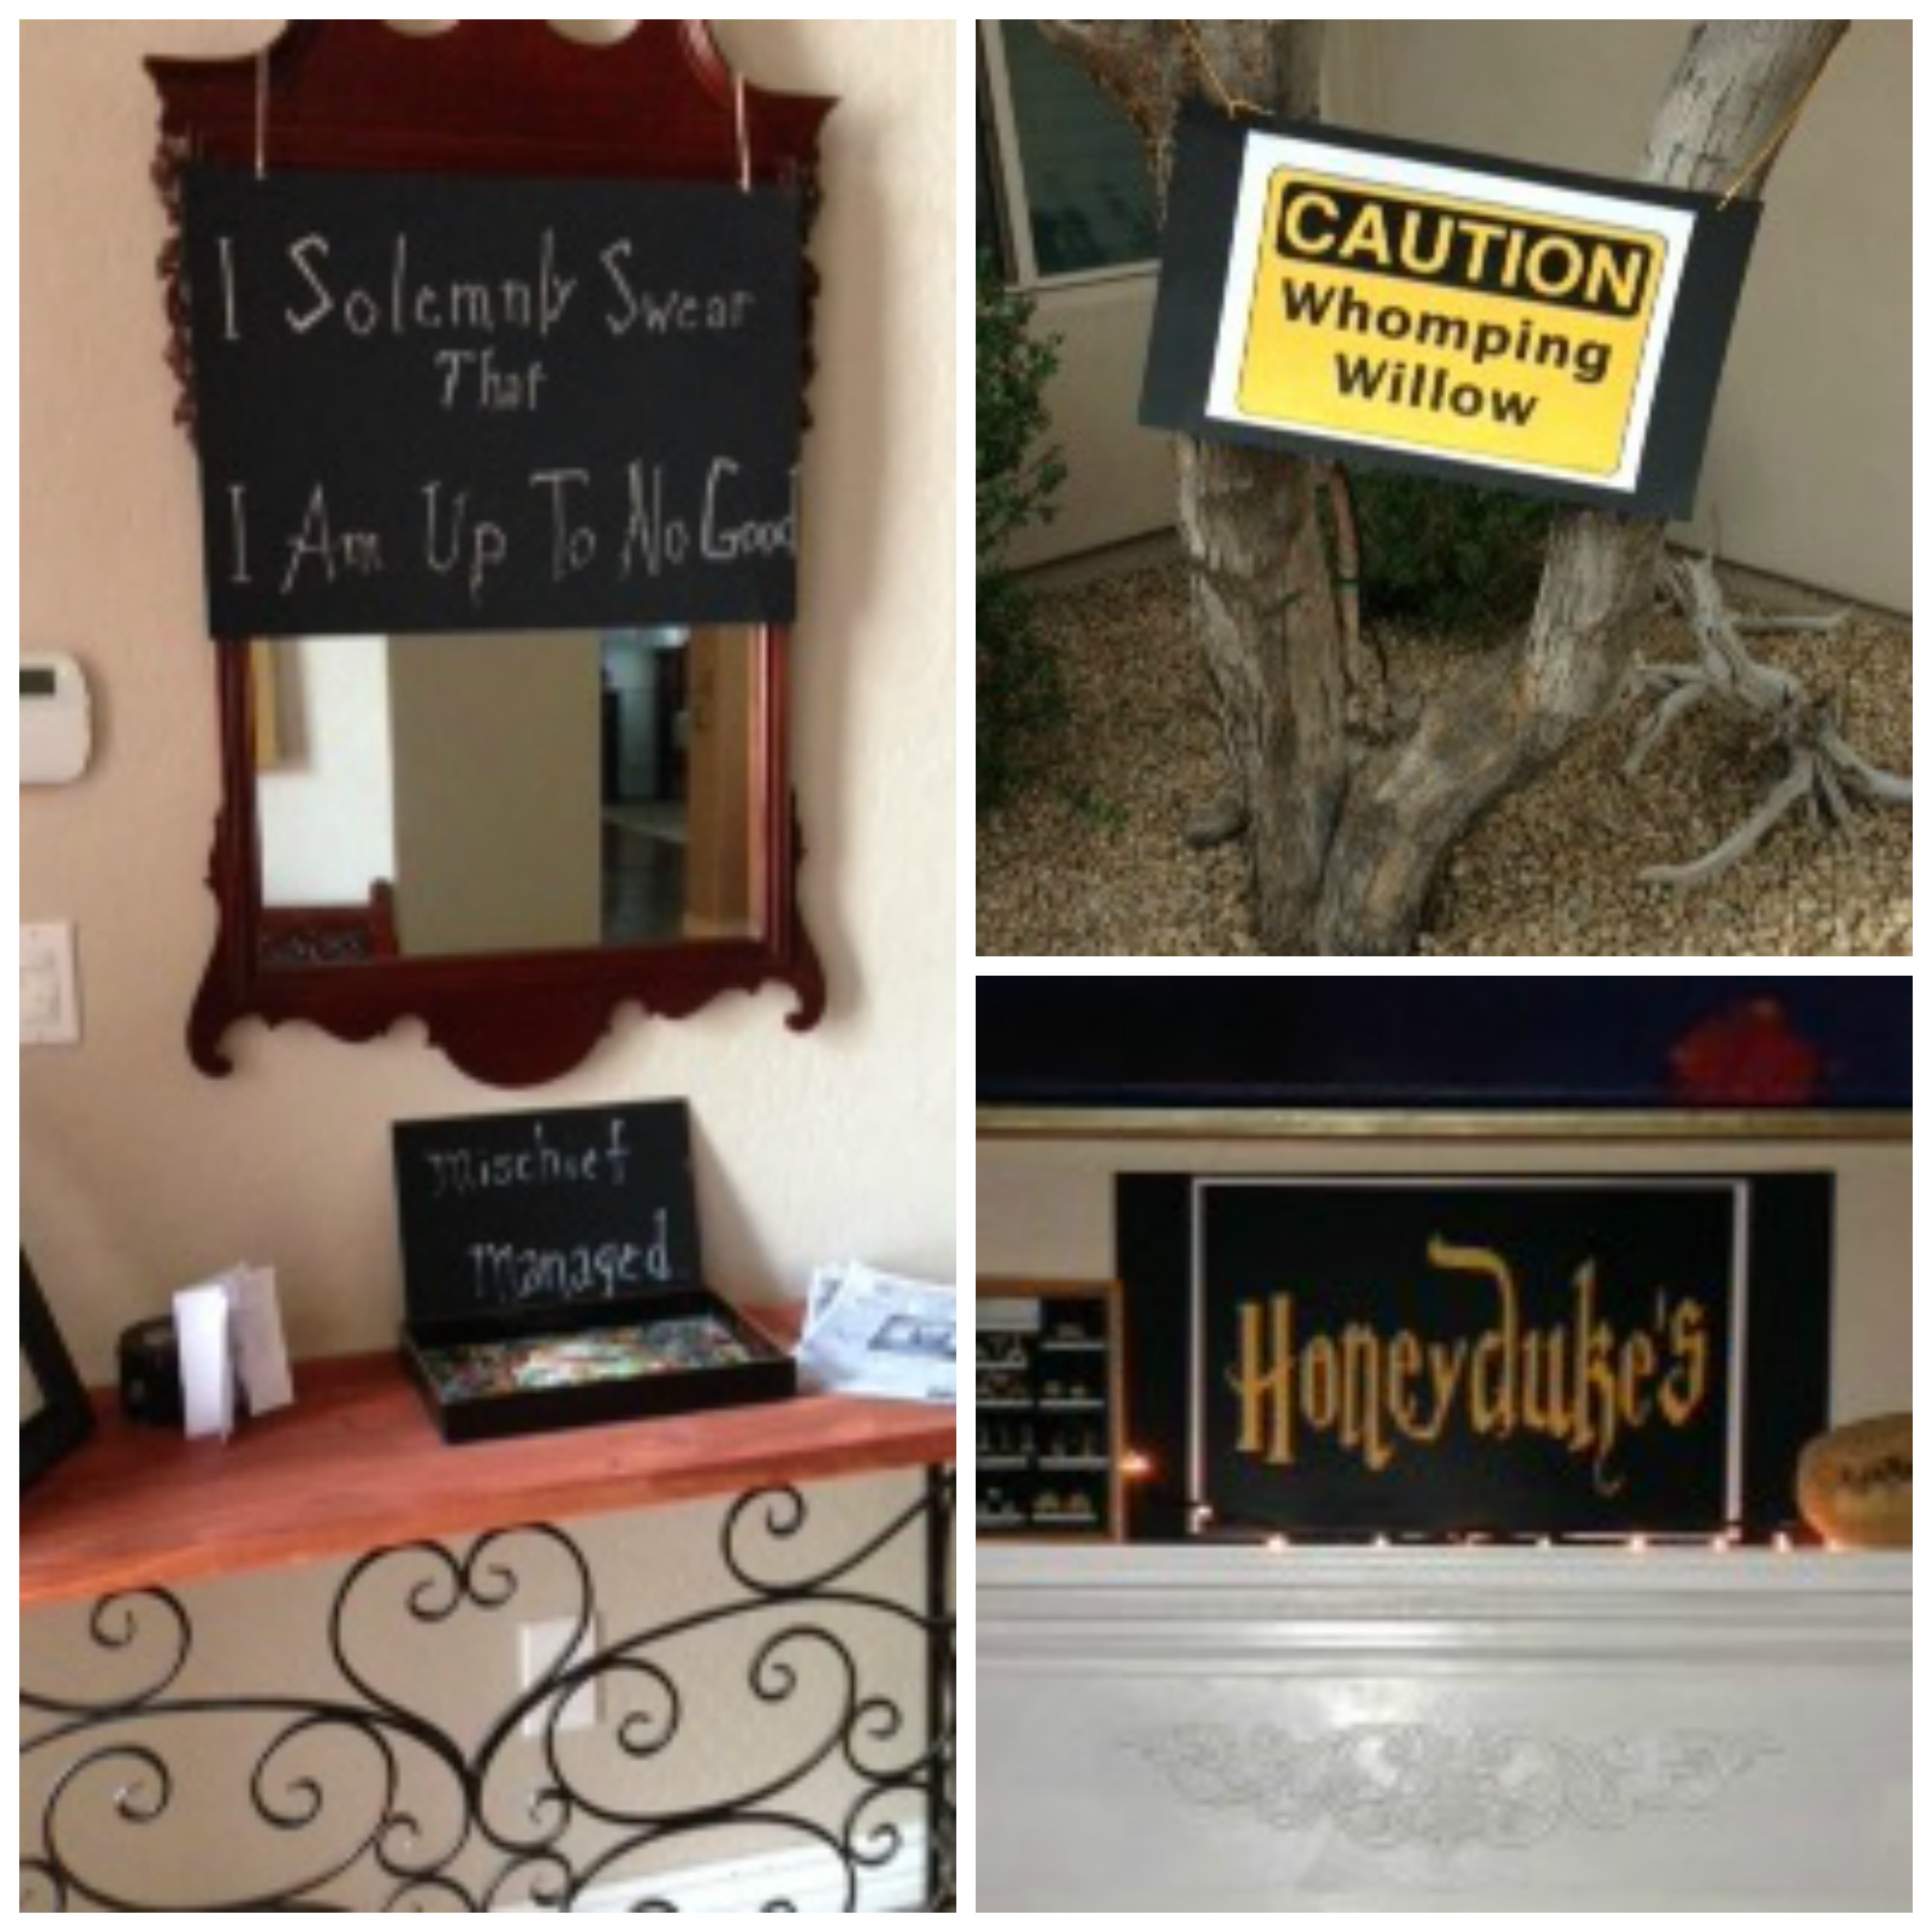 31 Ways To Throw The Ultimate Harry Potter Birthday Party  Harry potter  party games, Harry potter birthday, Harry potter birthday party